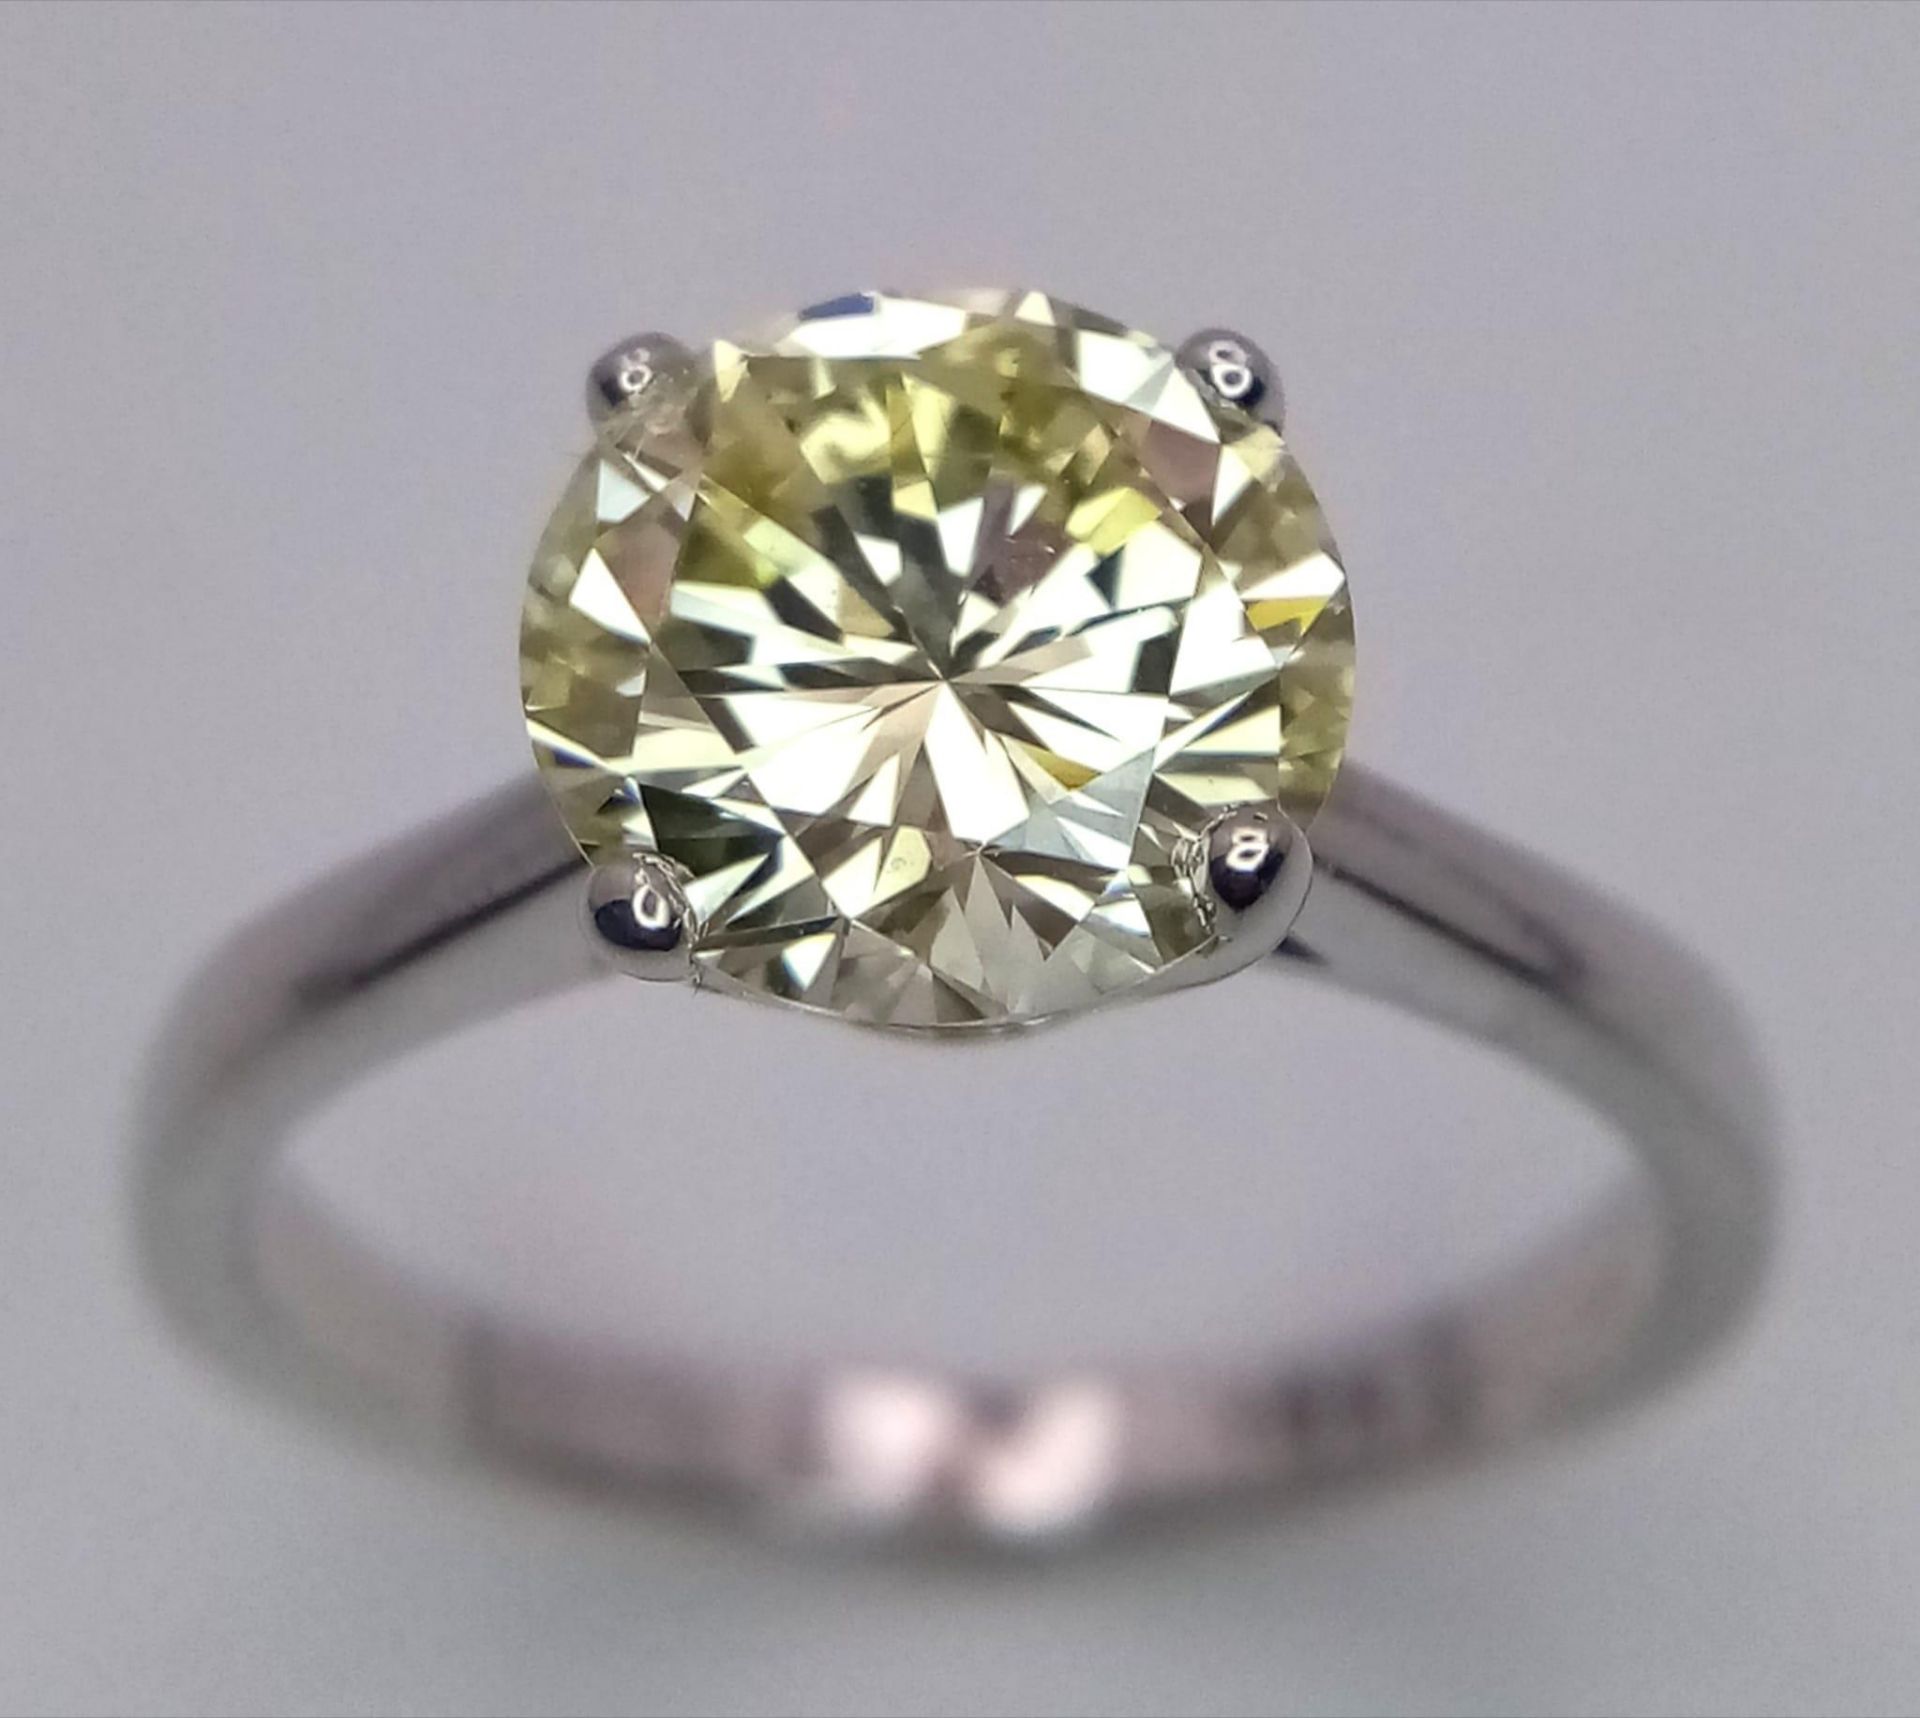 An 18K White Gold and 2.47ct VVS Yellow Diamond Ring. A brilliant round cut dancing centrepiece -